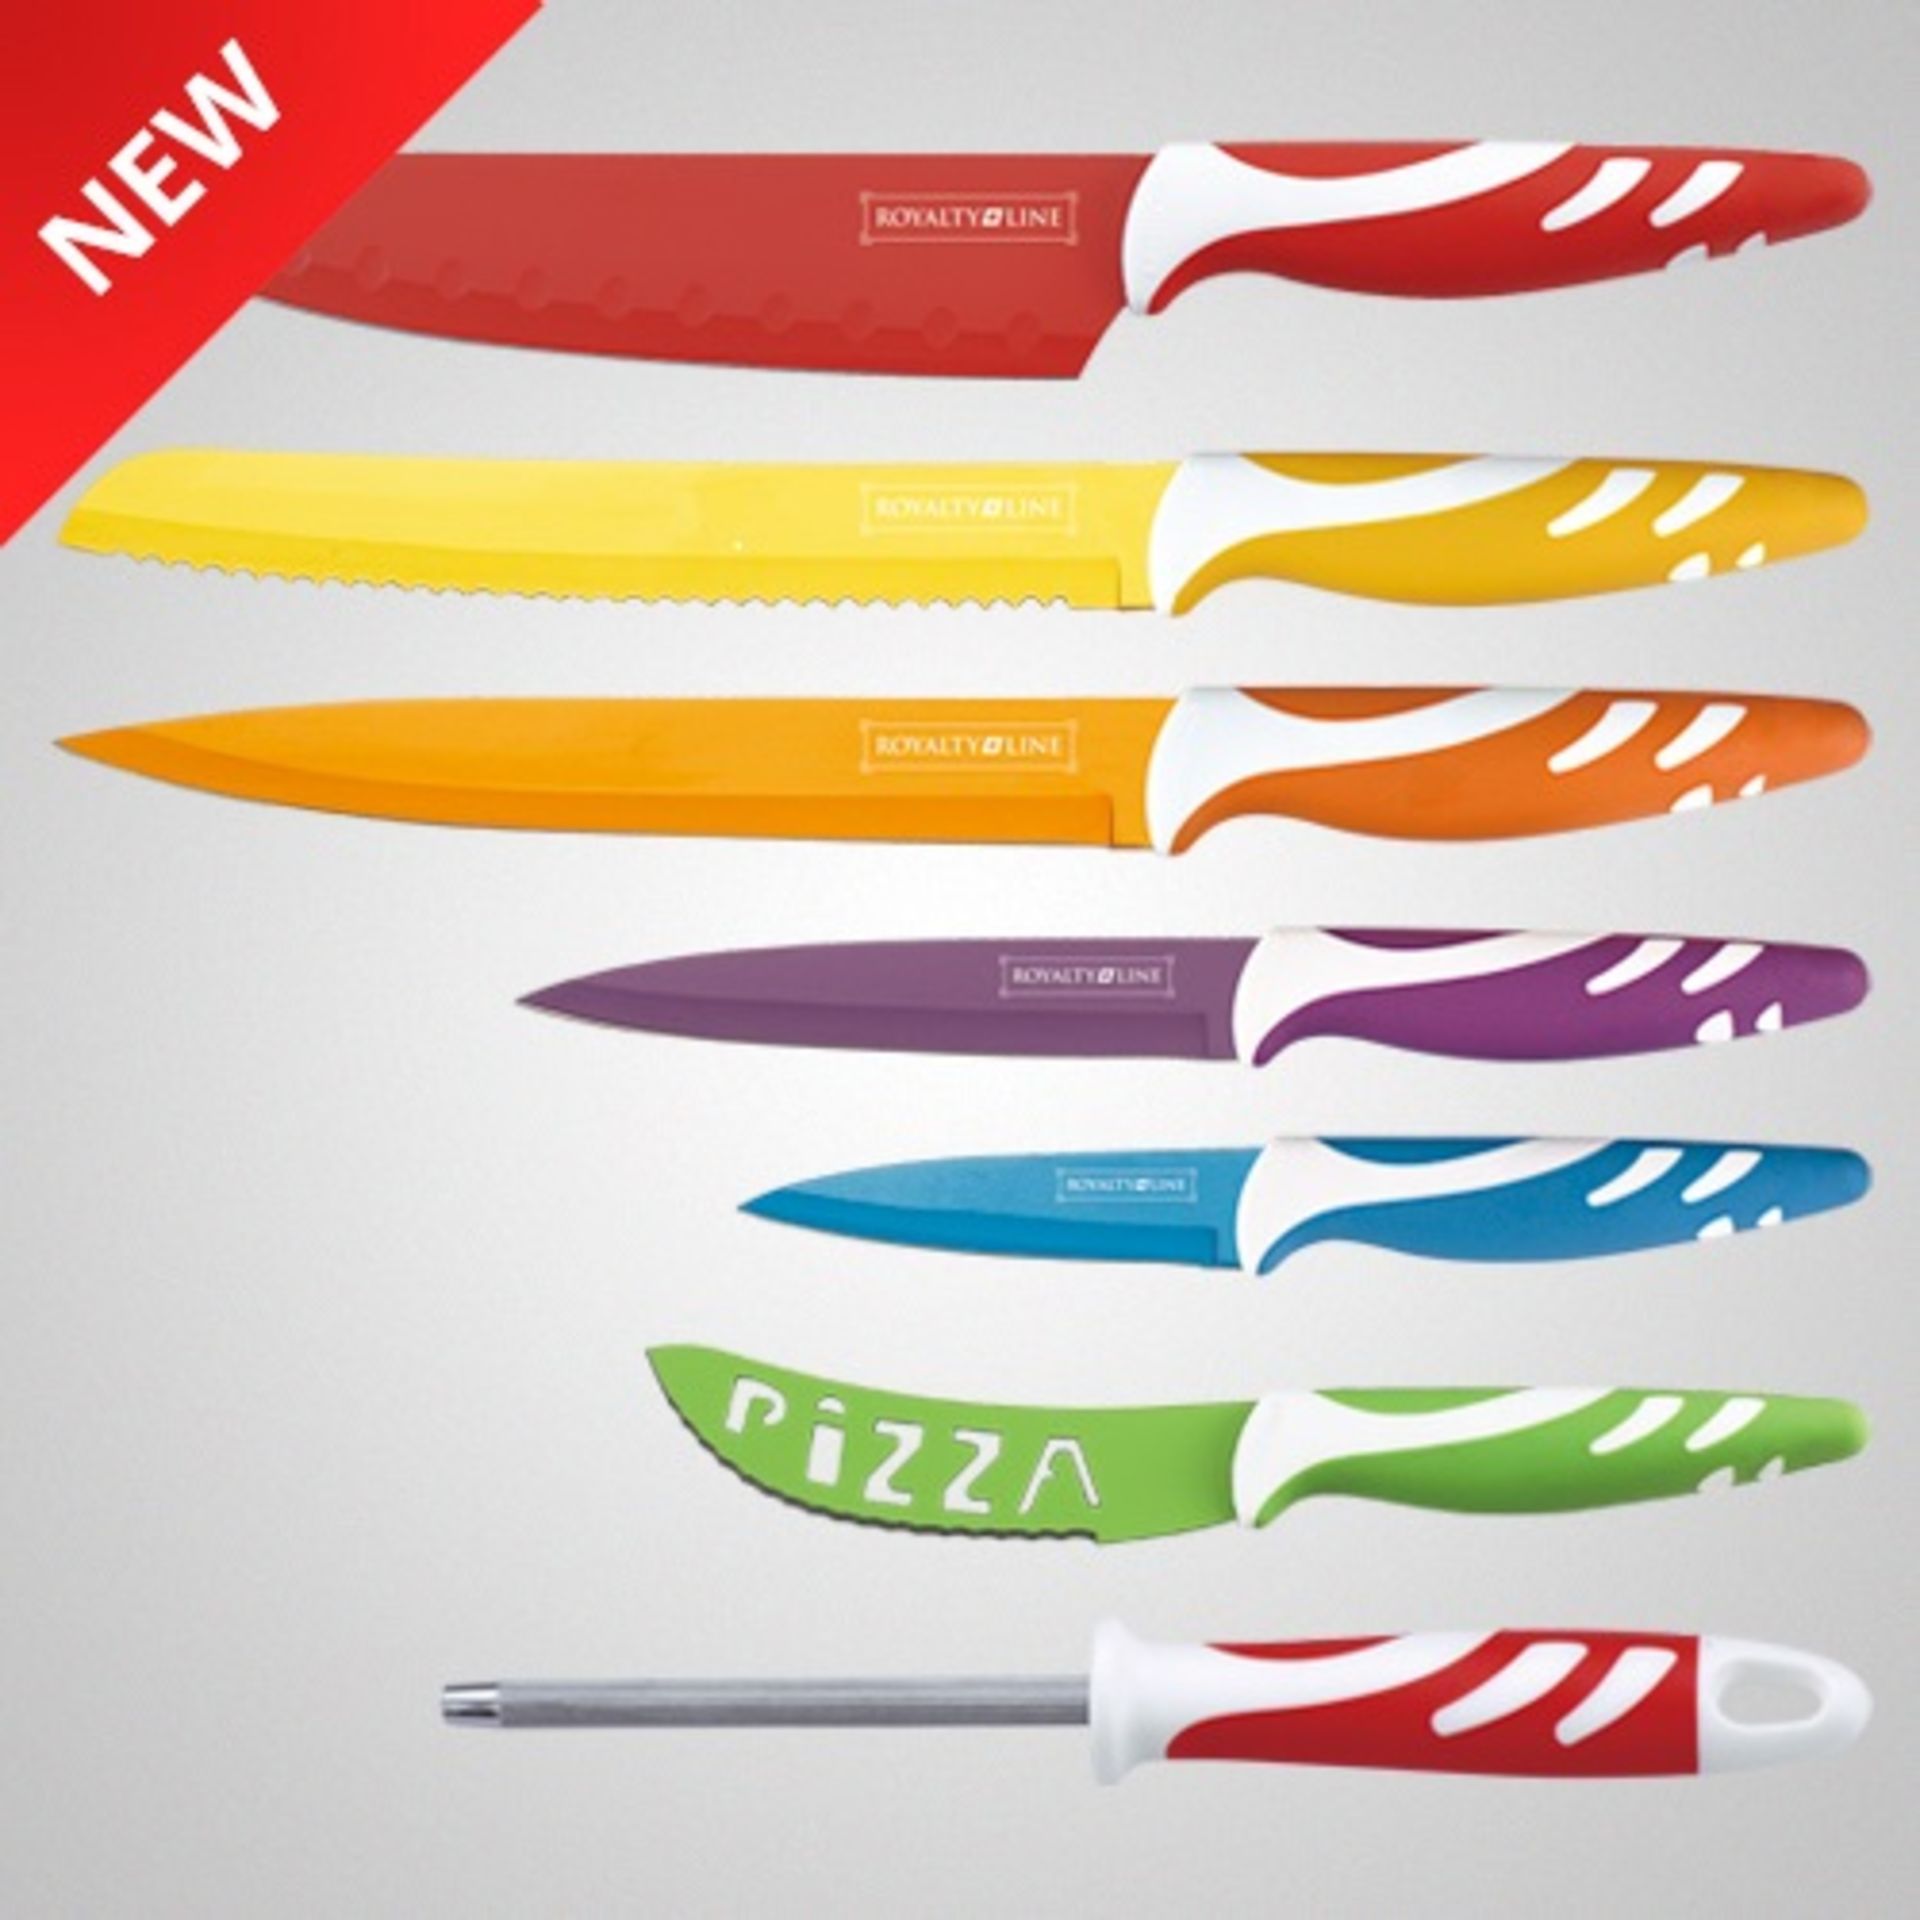 V *TRADE QTY* Brand New 7 Piece Non-Stick Multi Coloured Knife Set RRP99.00 Euros (Handle pattern - Image 3 of 3